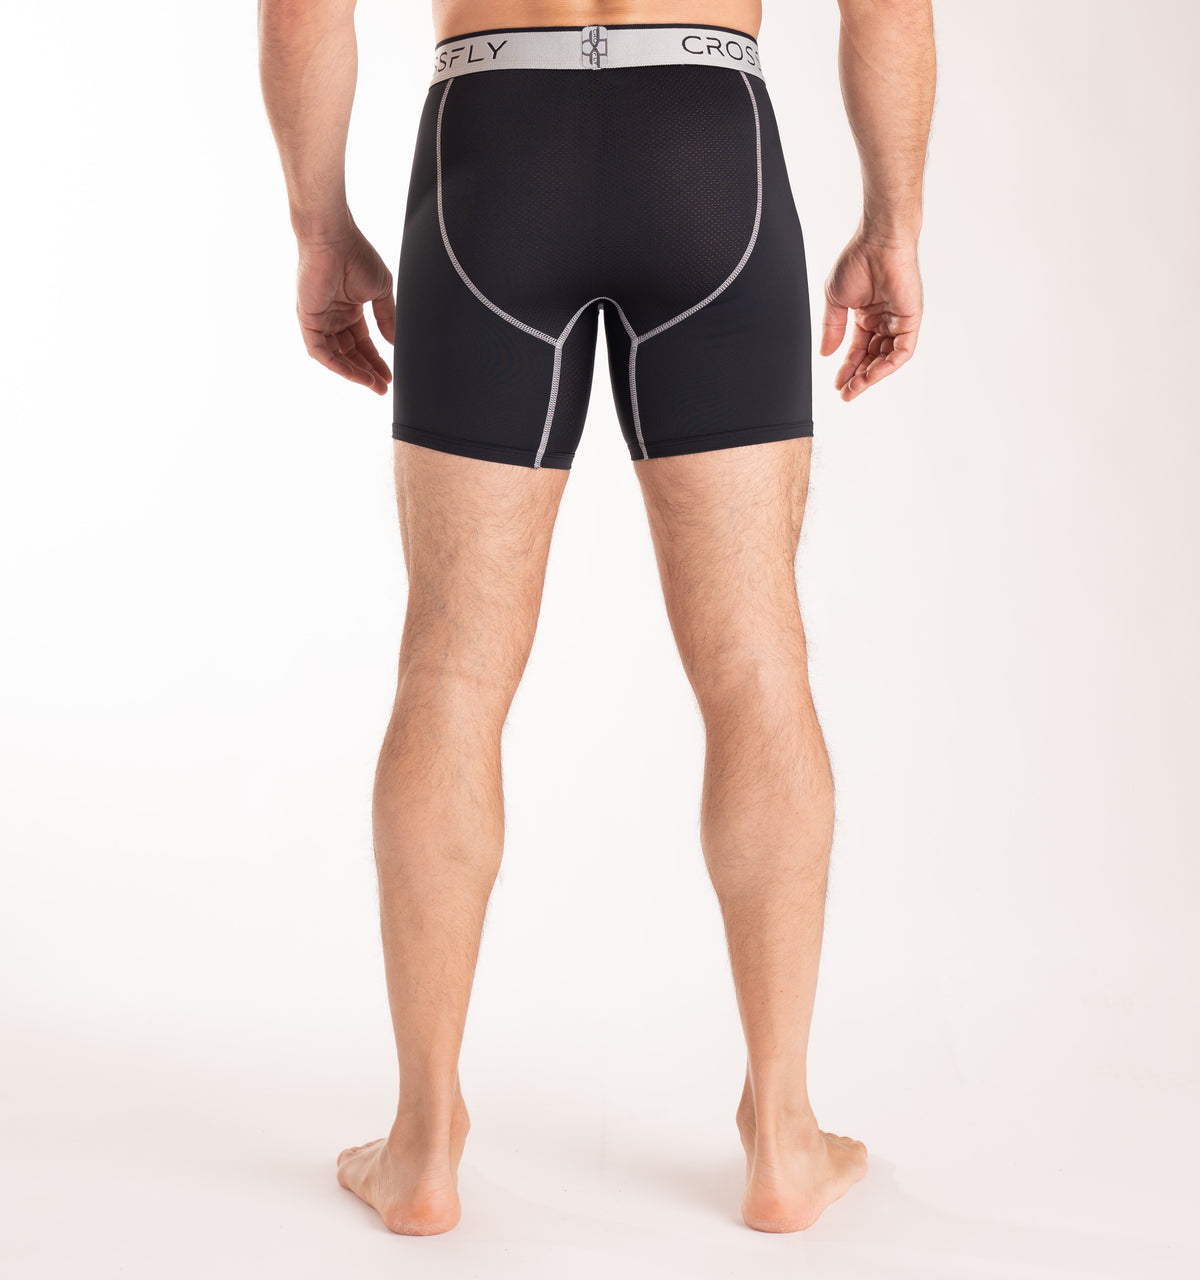 Crossfly men&#39;s Pro 7&quot; black / silver boxers from the Performance series, featuring X-Fly and Coccoon internal pocket support.